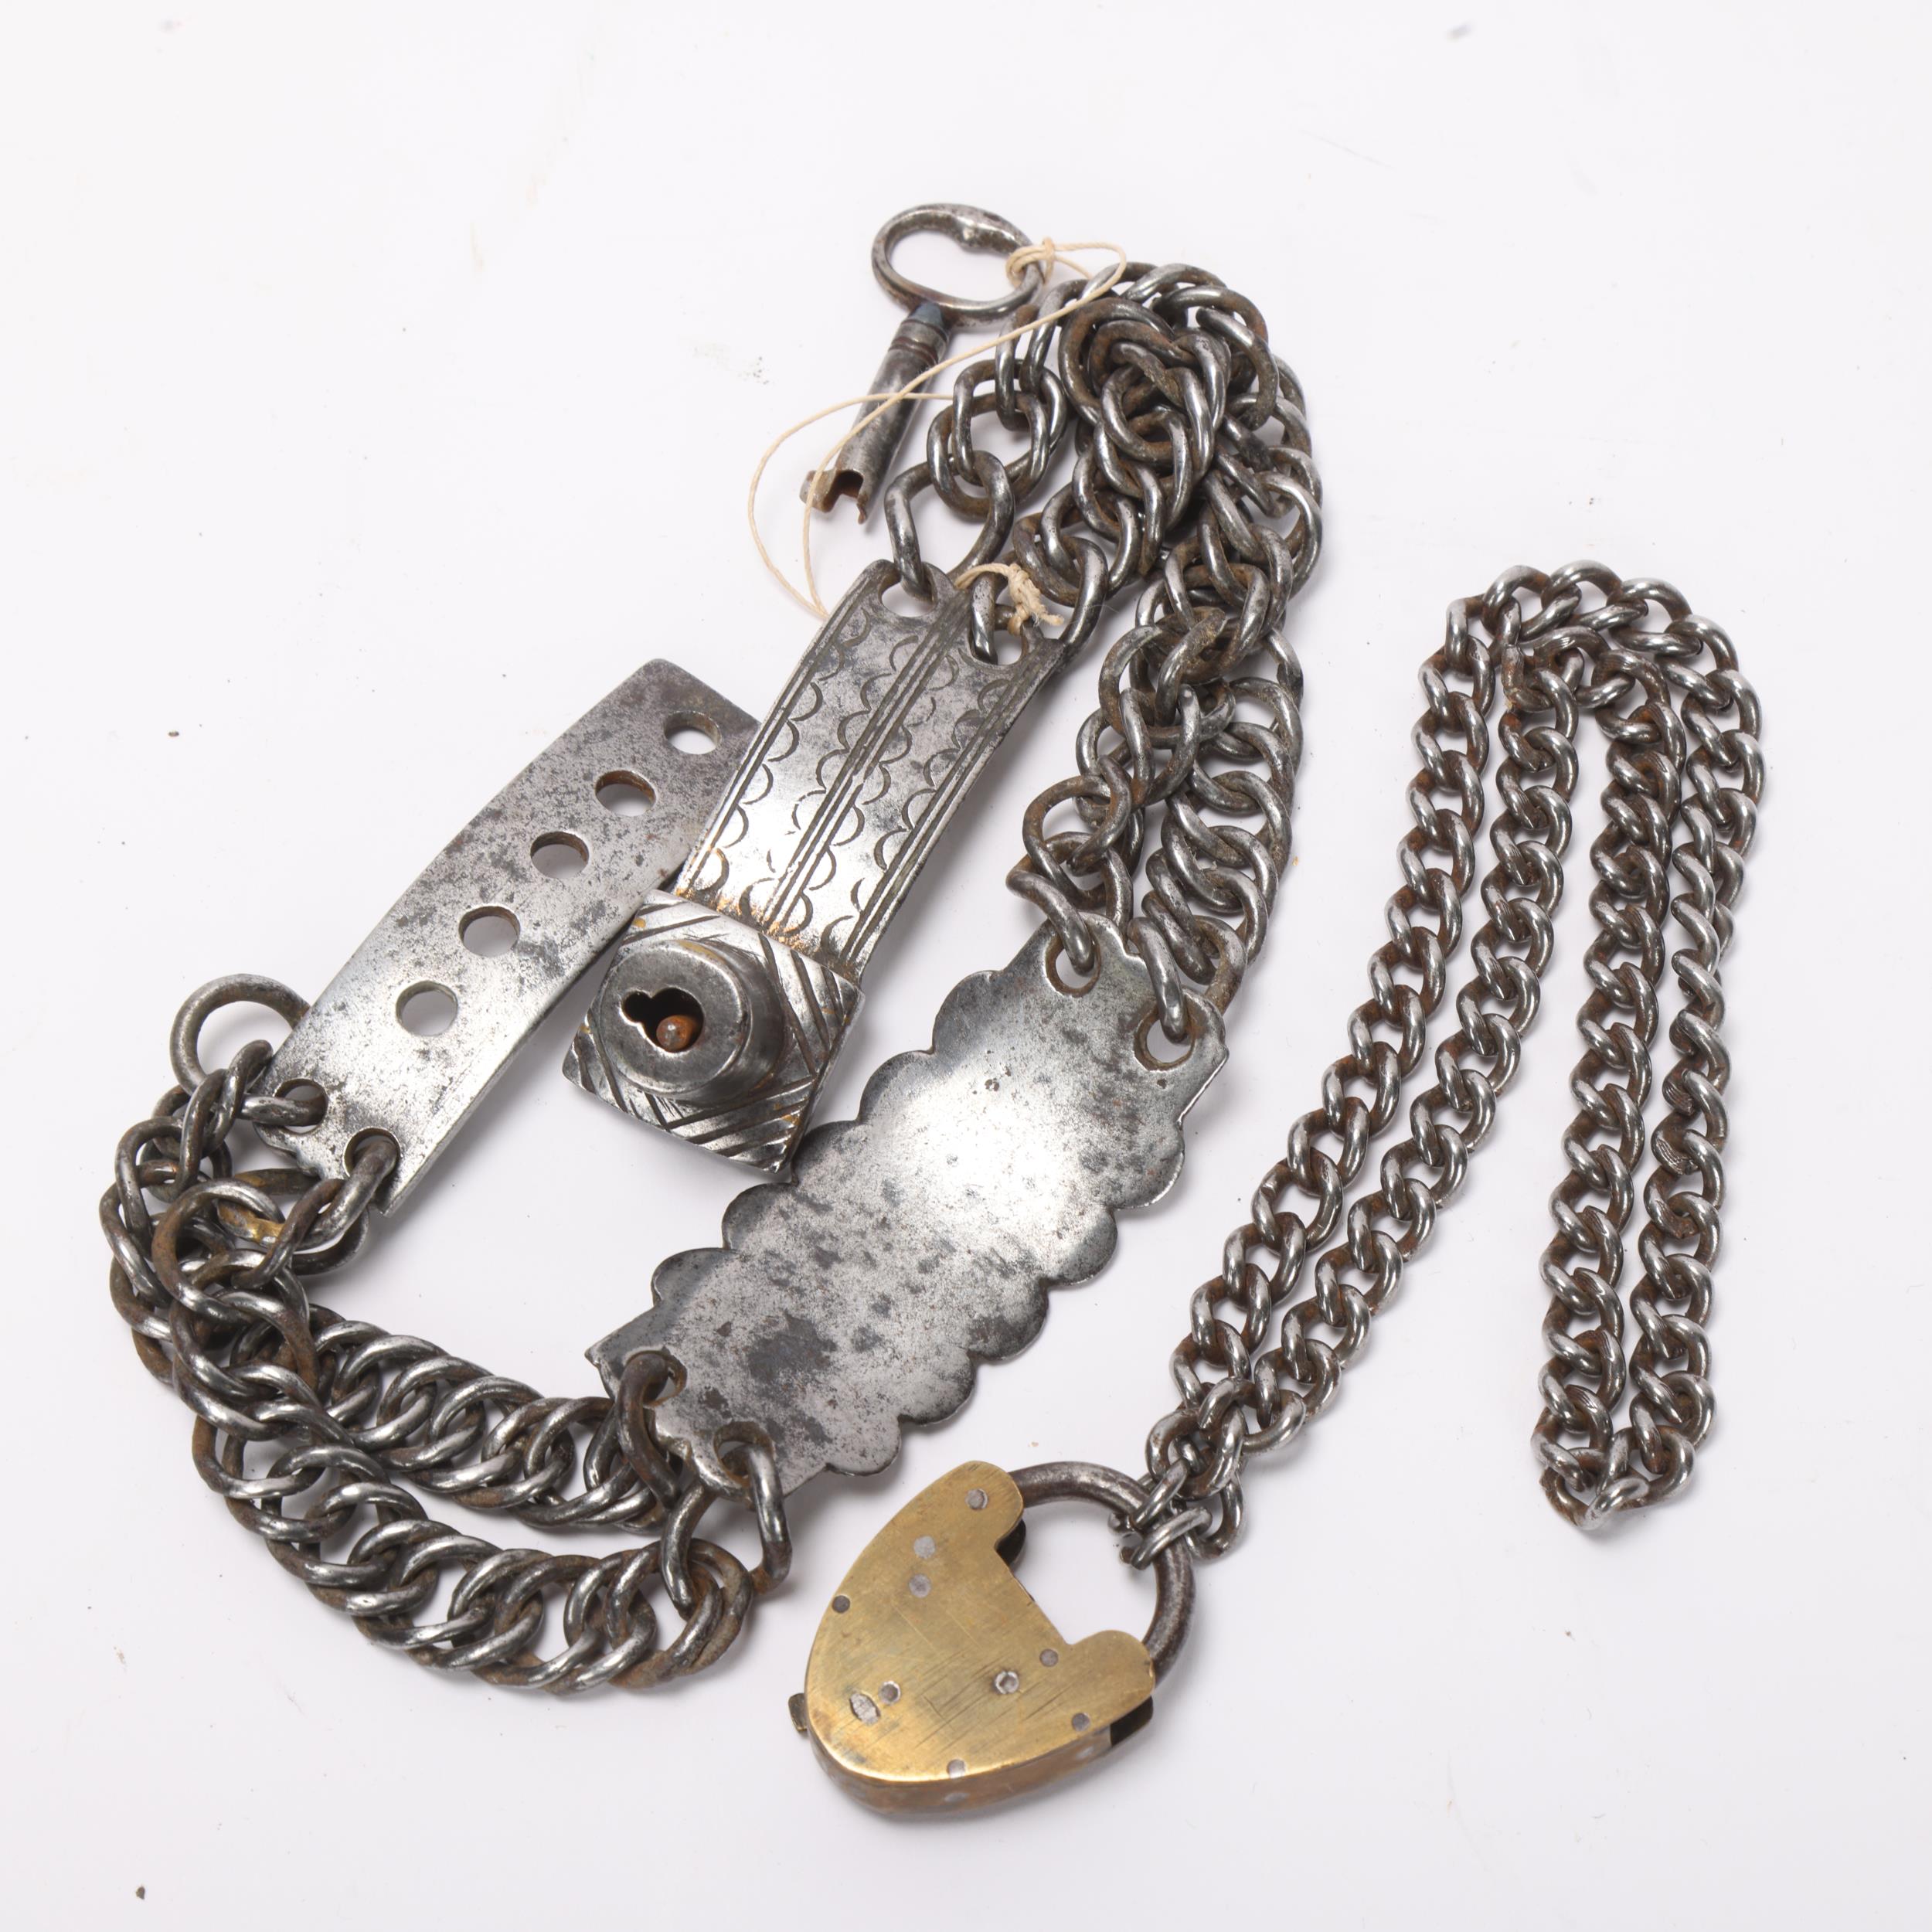 An Antique steel curb link dog collar, with panel engraved James Brook Biddenden, complete with key, - Image 3 of 3